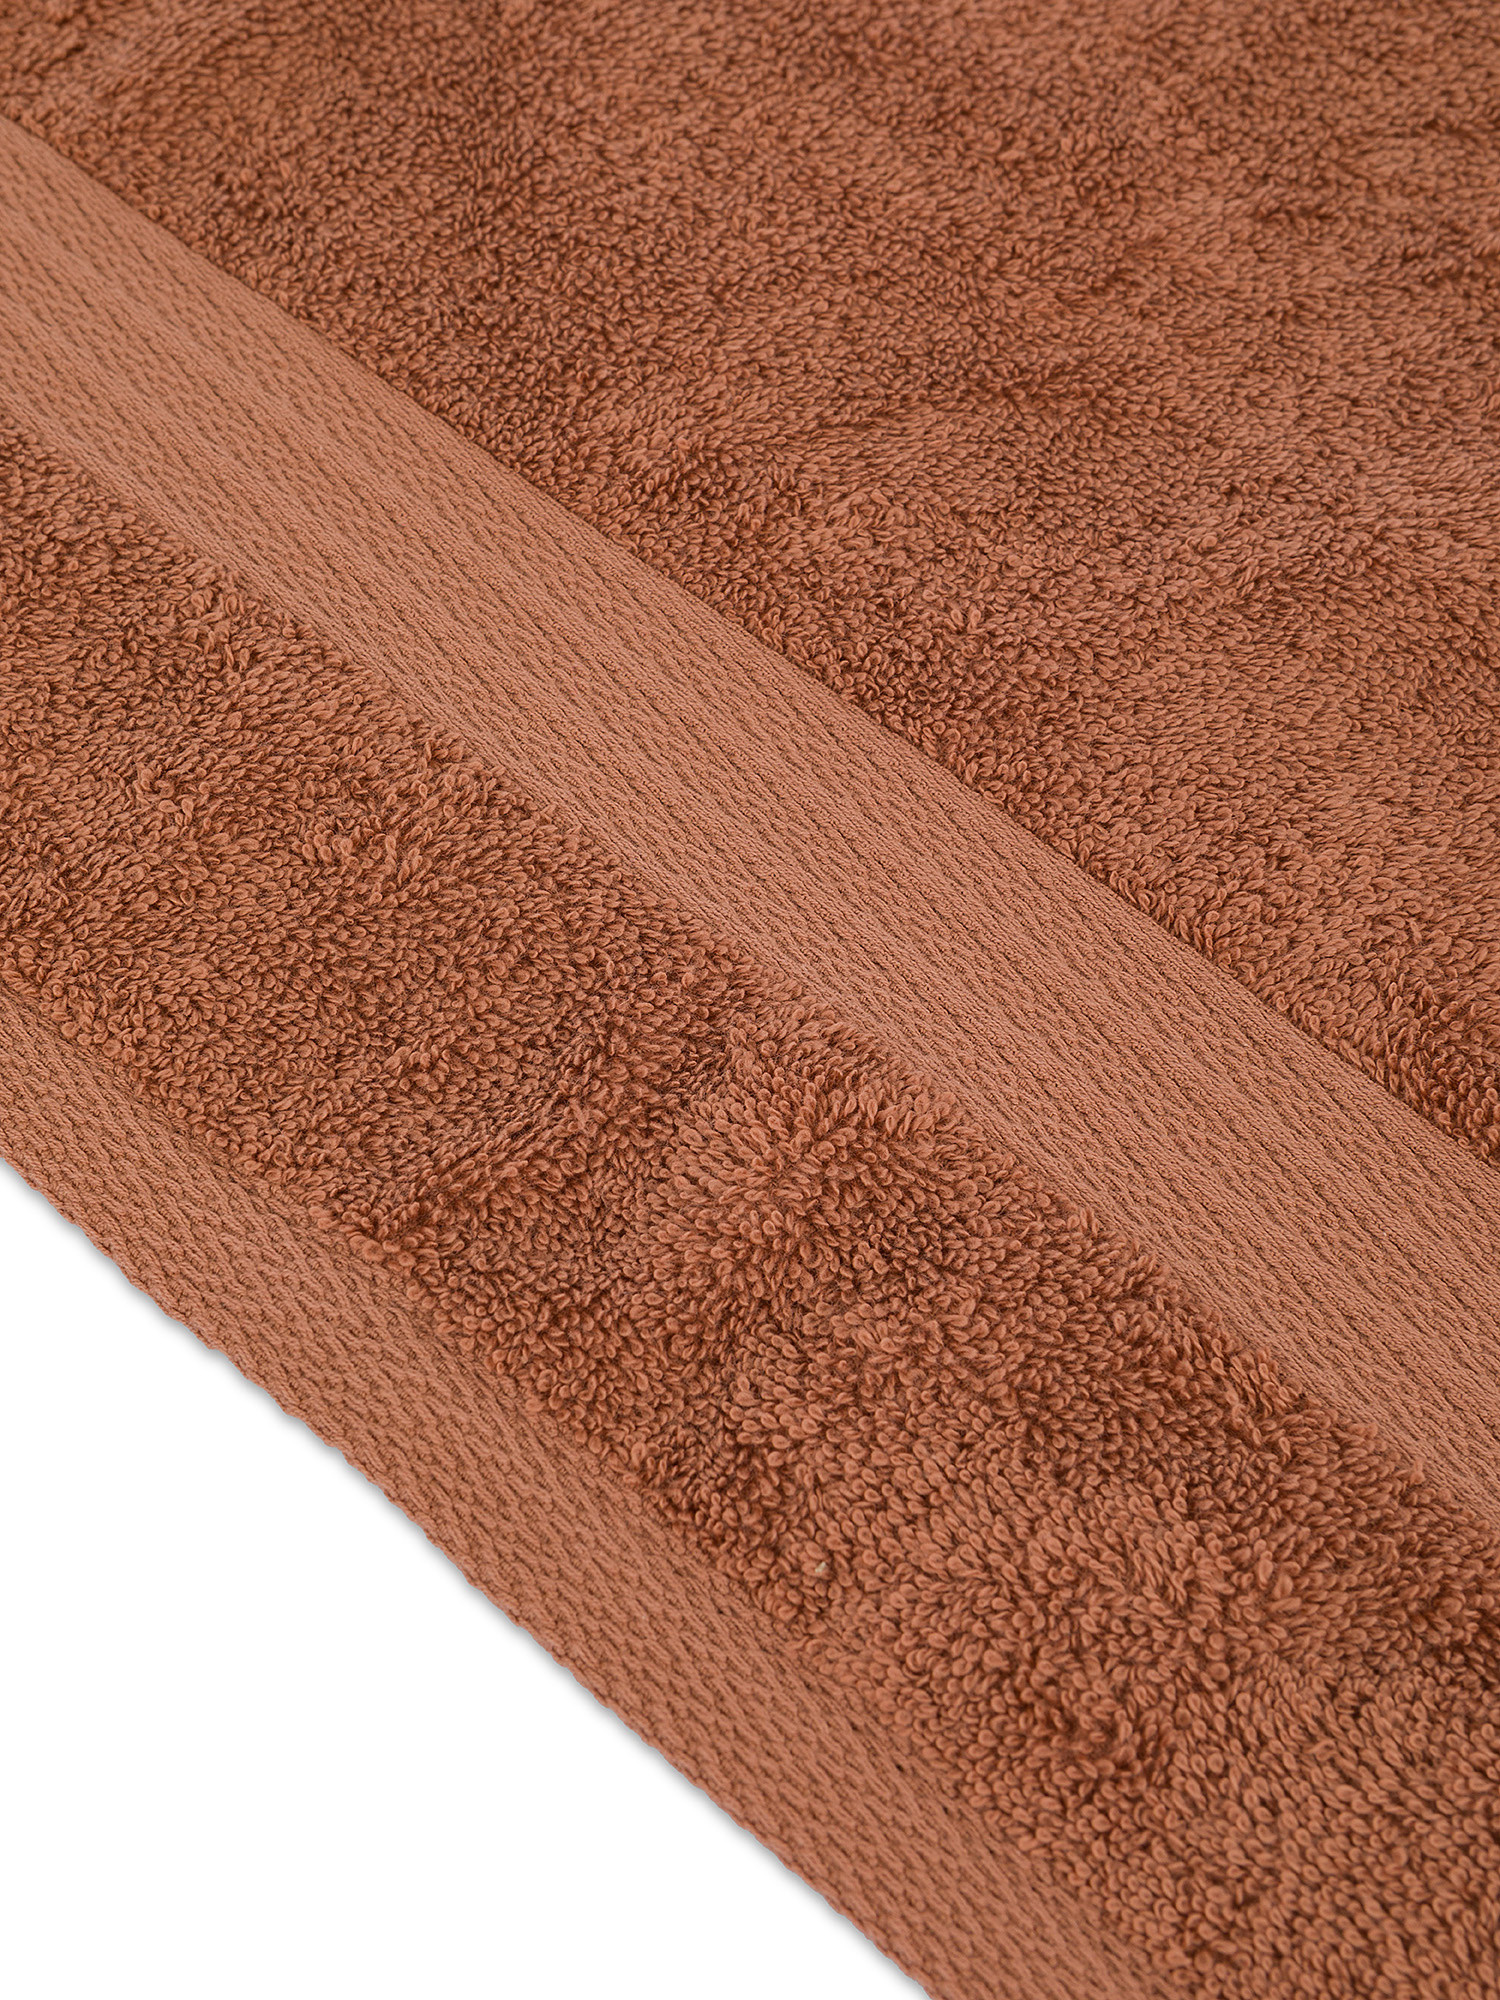 Zefiro solid color 100% cotton towel, Light Brown, large image number 2